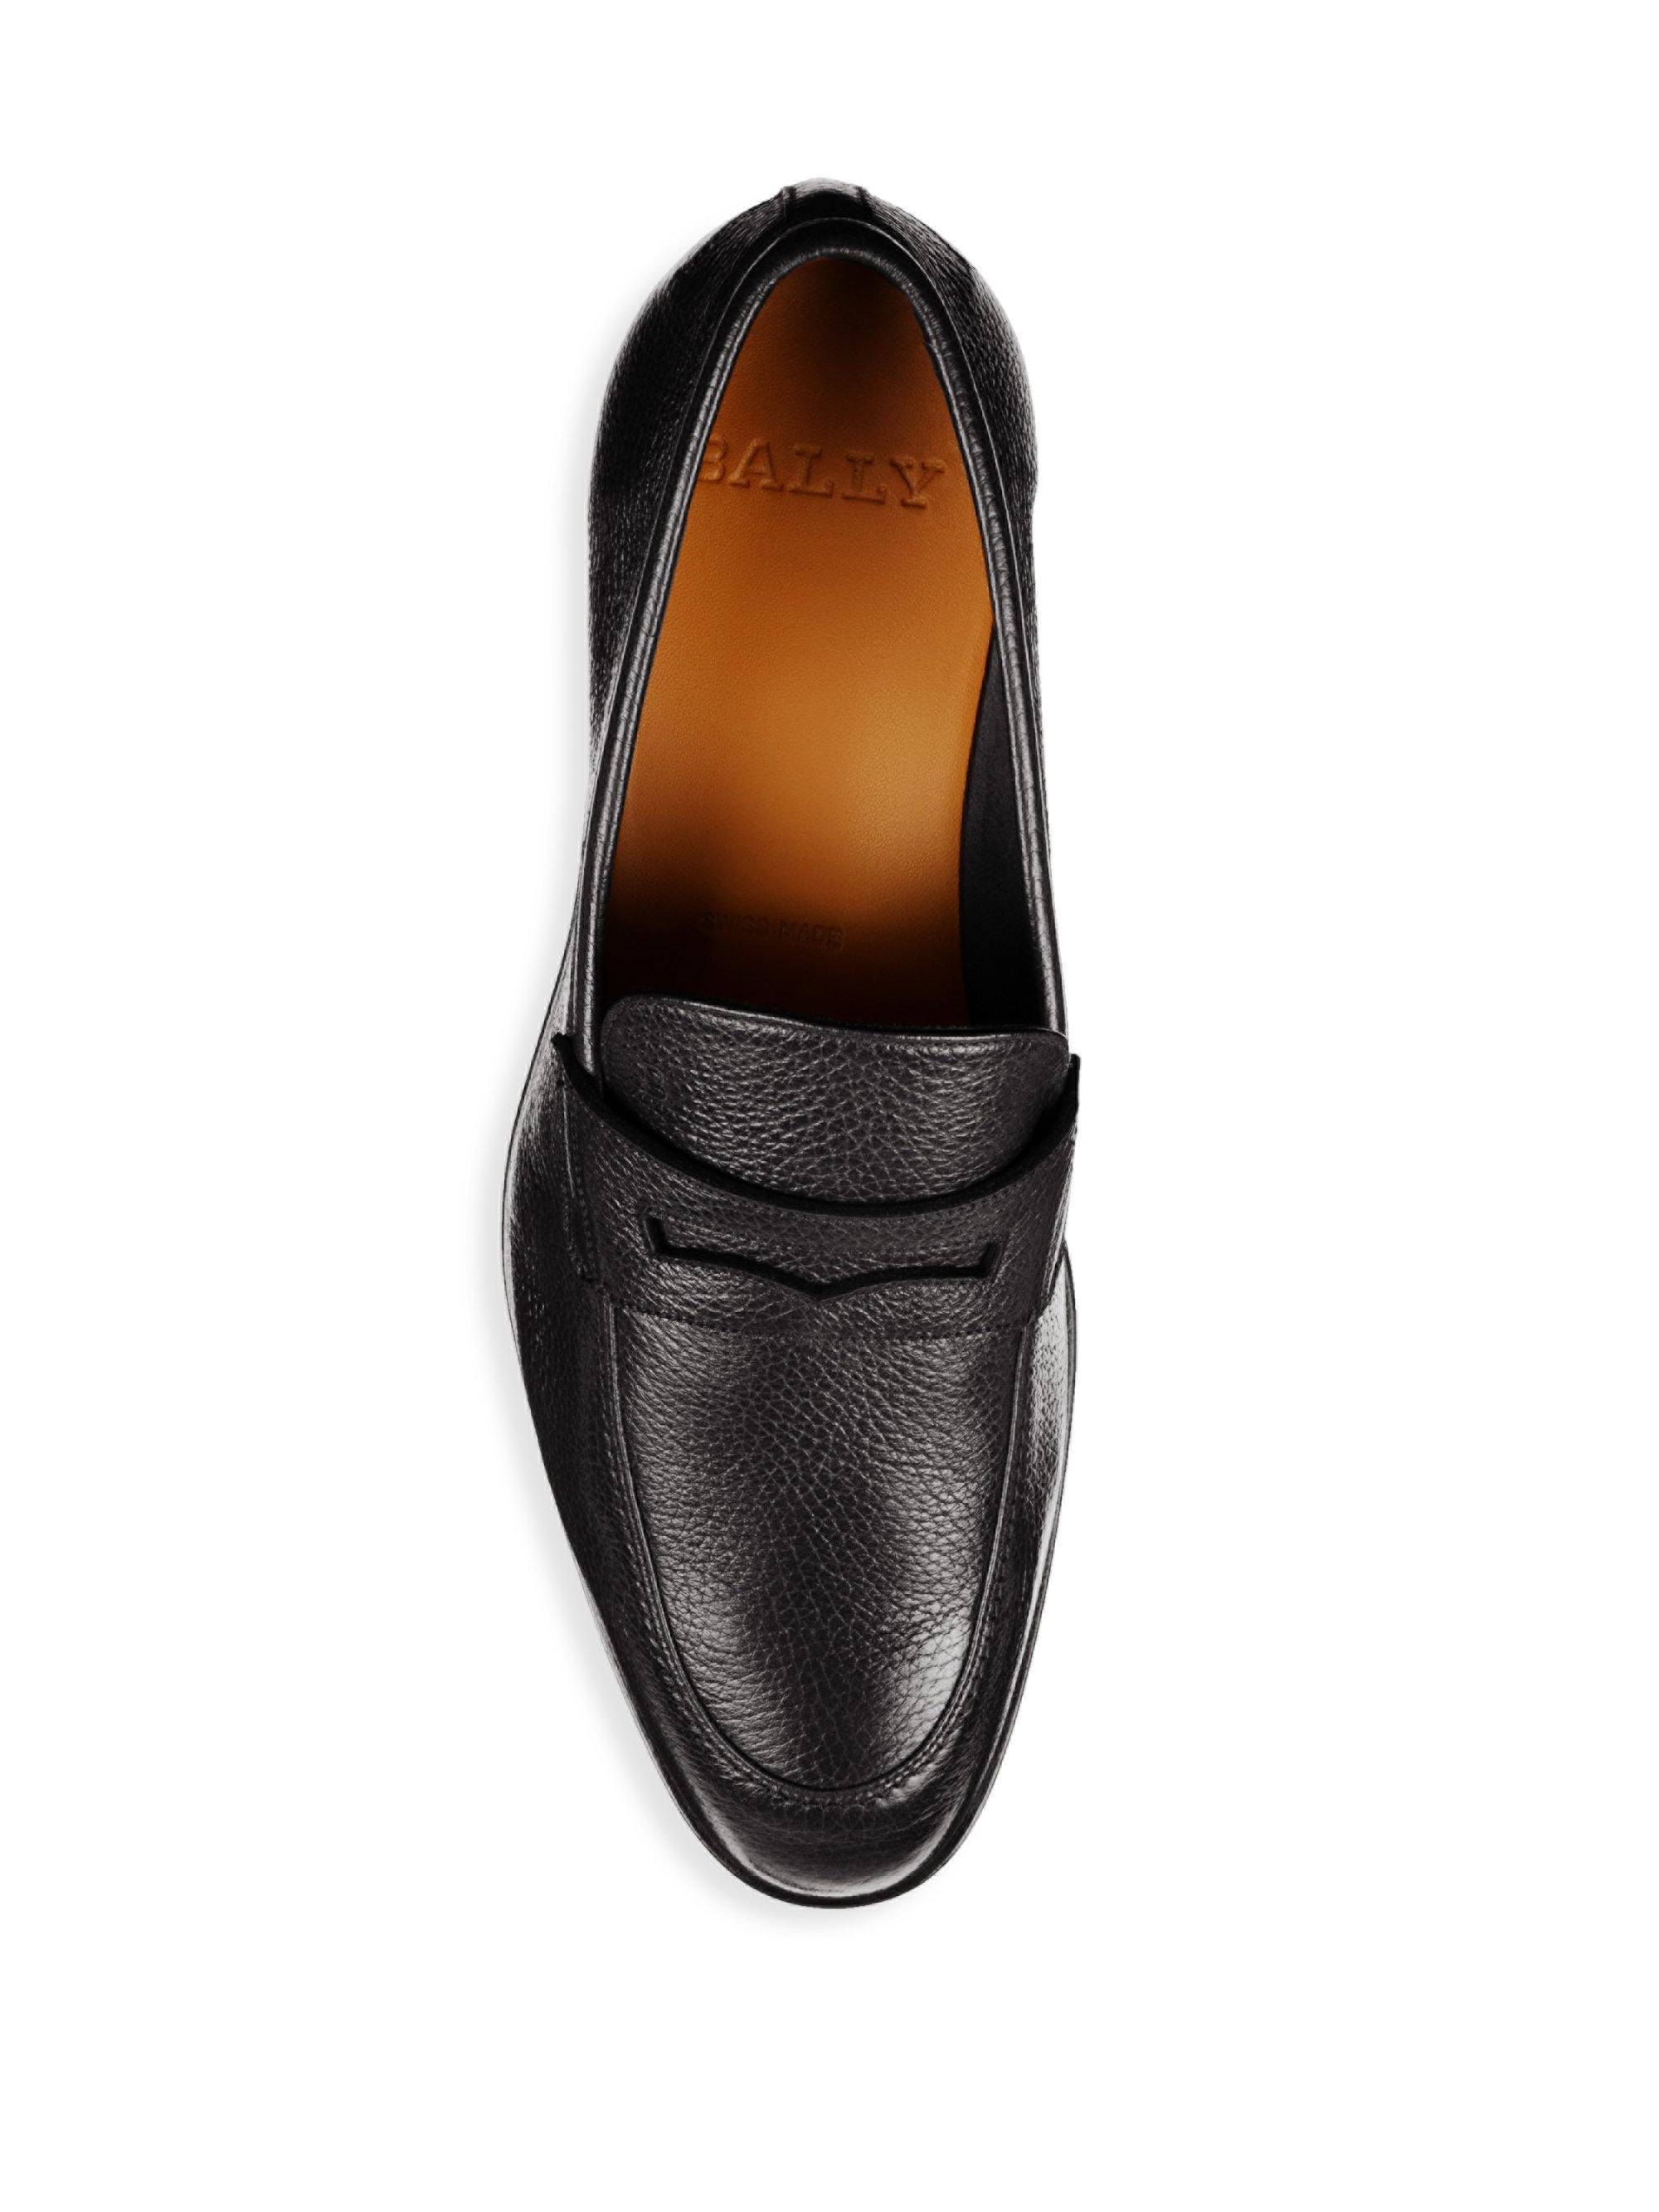 Bally Webb Grained Leather Penny Loafers in Black for Men - Lyst